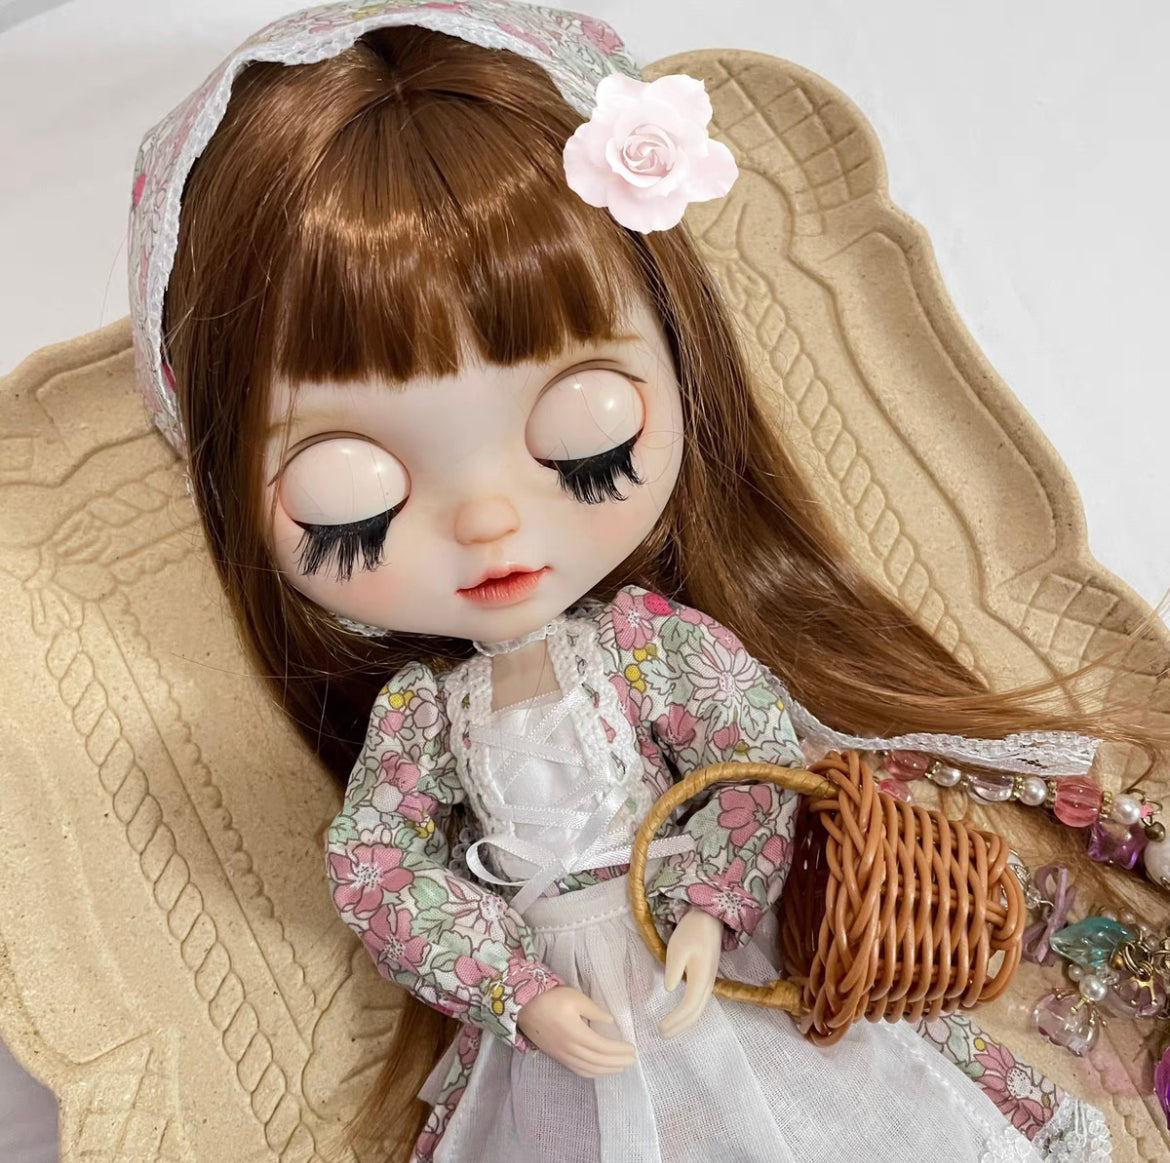 White Long Dress Night Dress for Blythe,BJD 1/6 Doll Clothes Customized 08